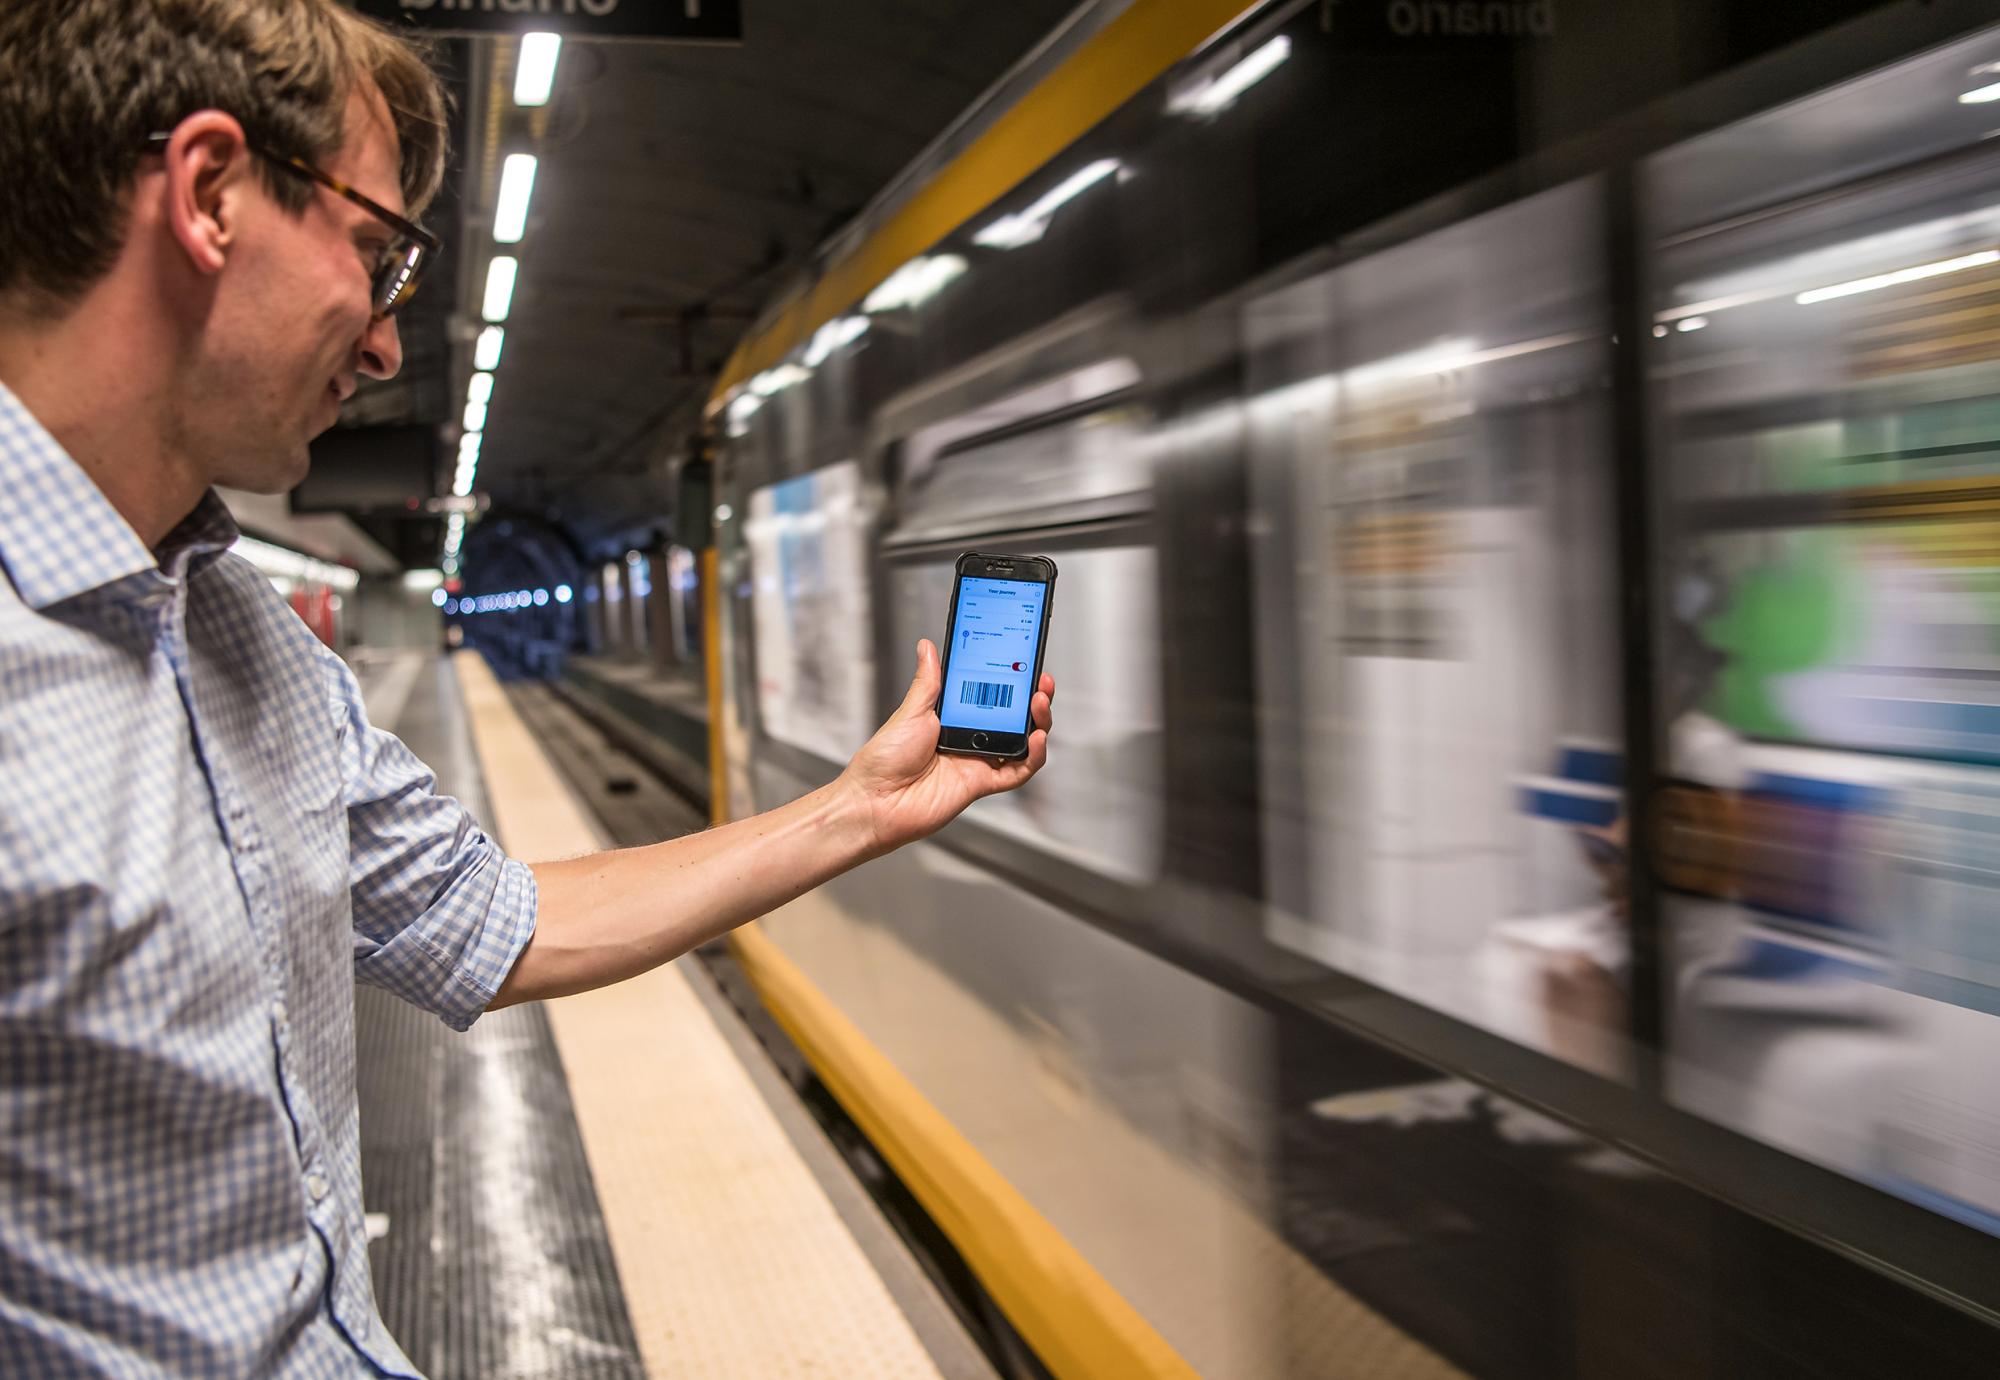 New world-first smart digital app enters commercial service in Genoa